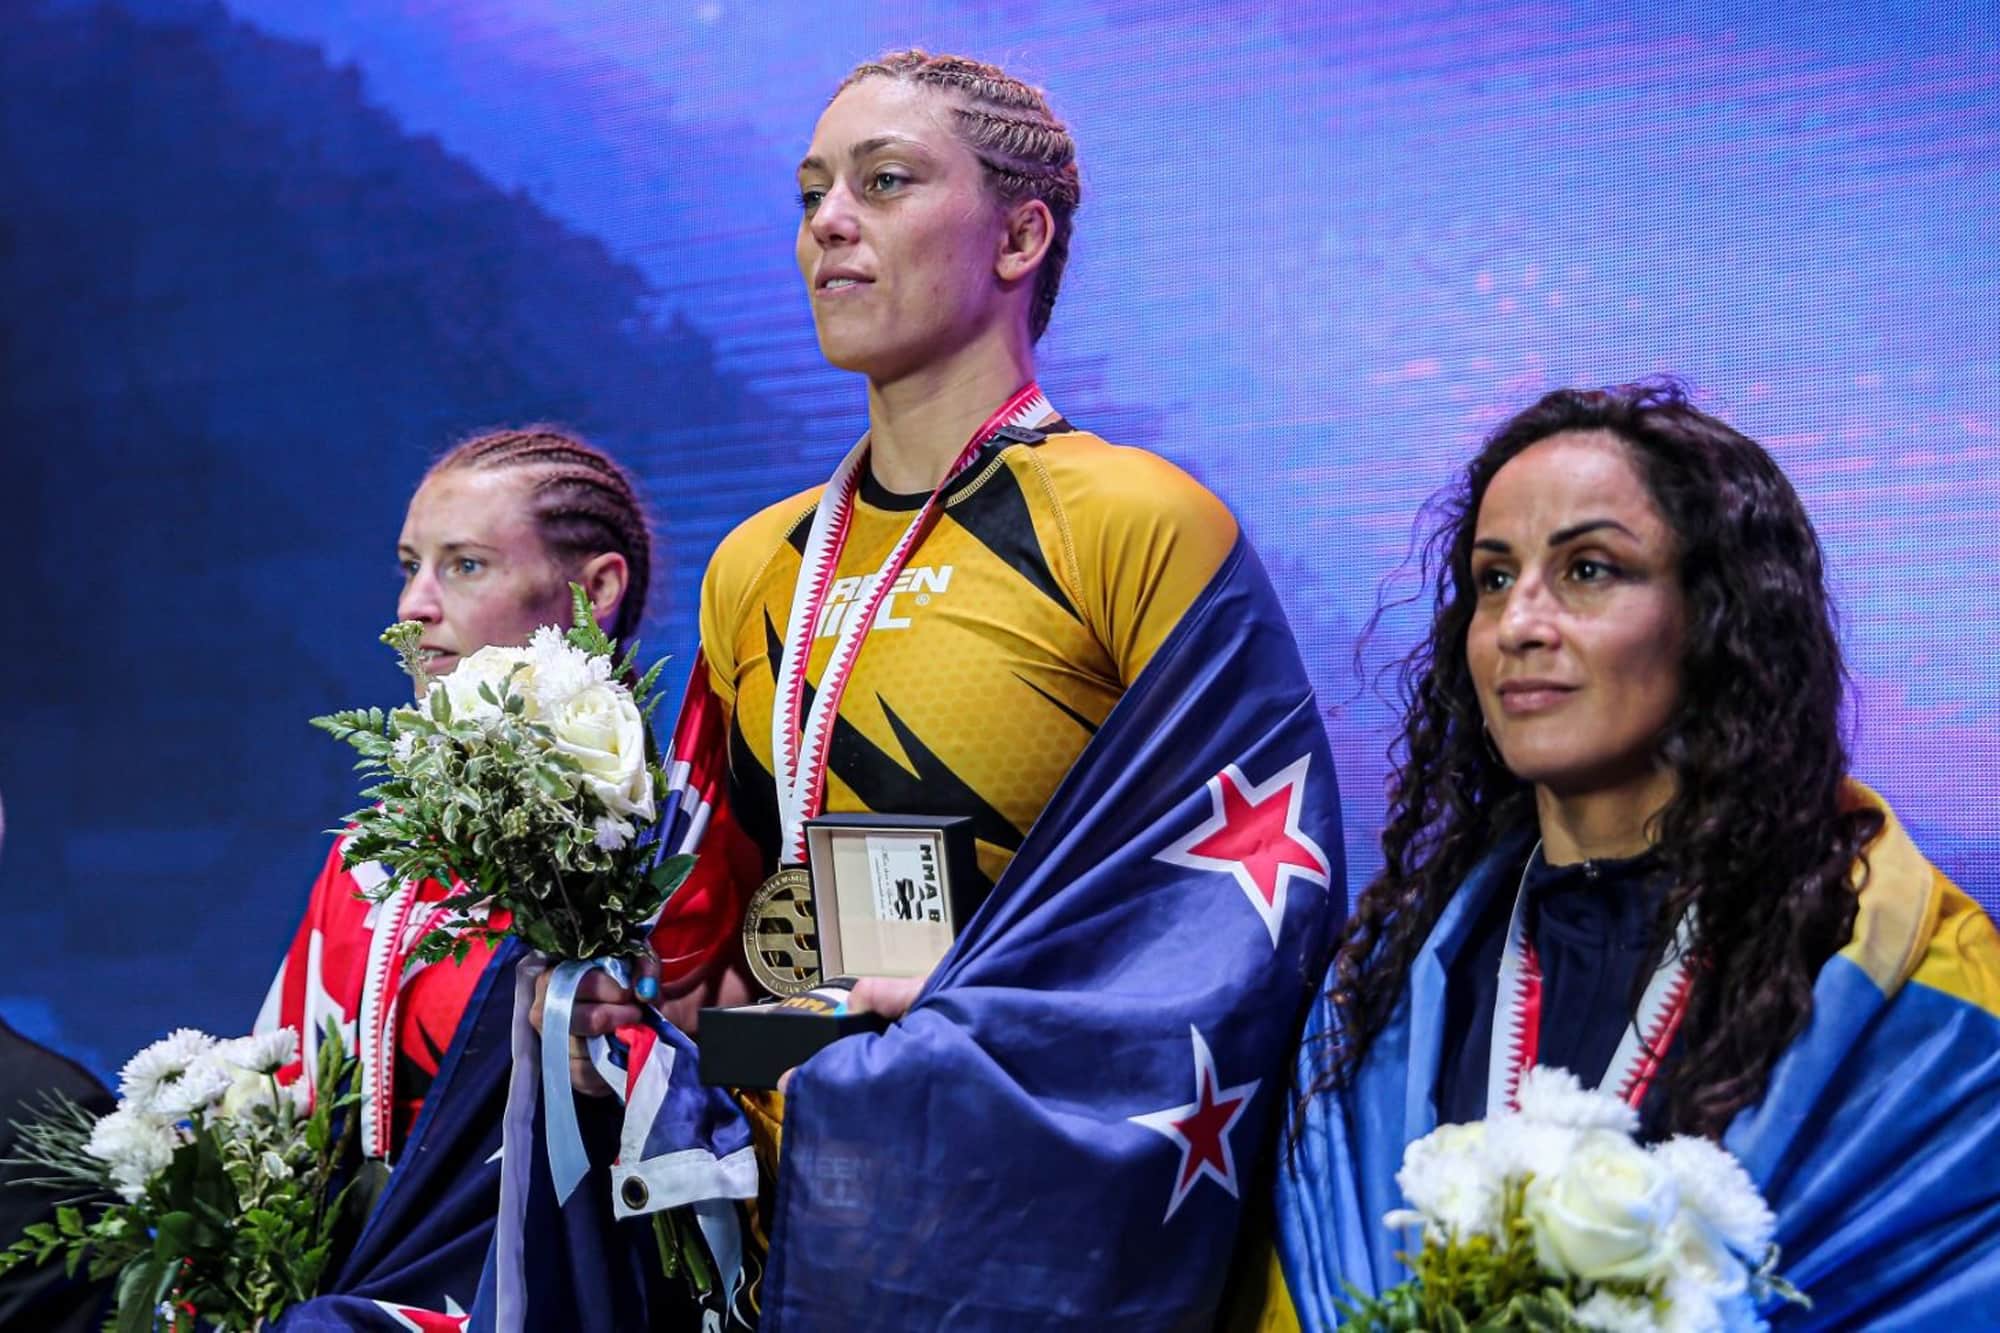 PFL champion and Olympic gold medalist Kayla Harrison impressed by IMMAF star Michelle Montague